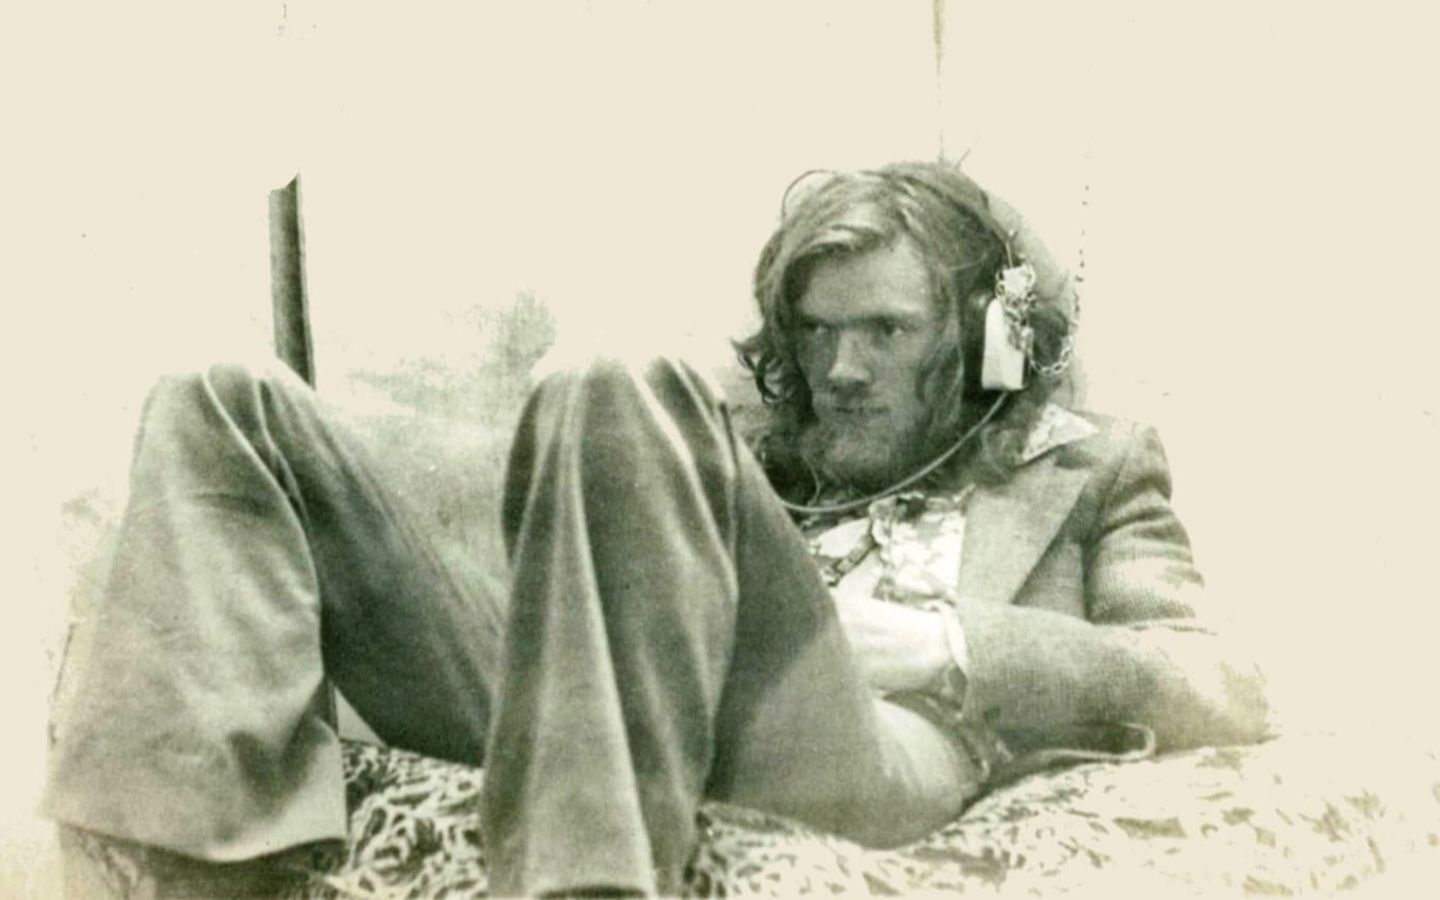 Sepia photo of Richard Branson with long hair, sitting down in a suit in a relaxed fashion whist listening to music